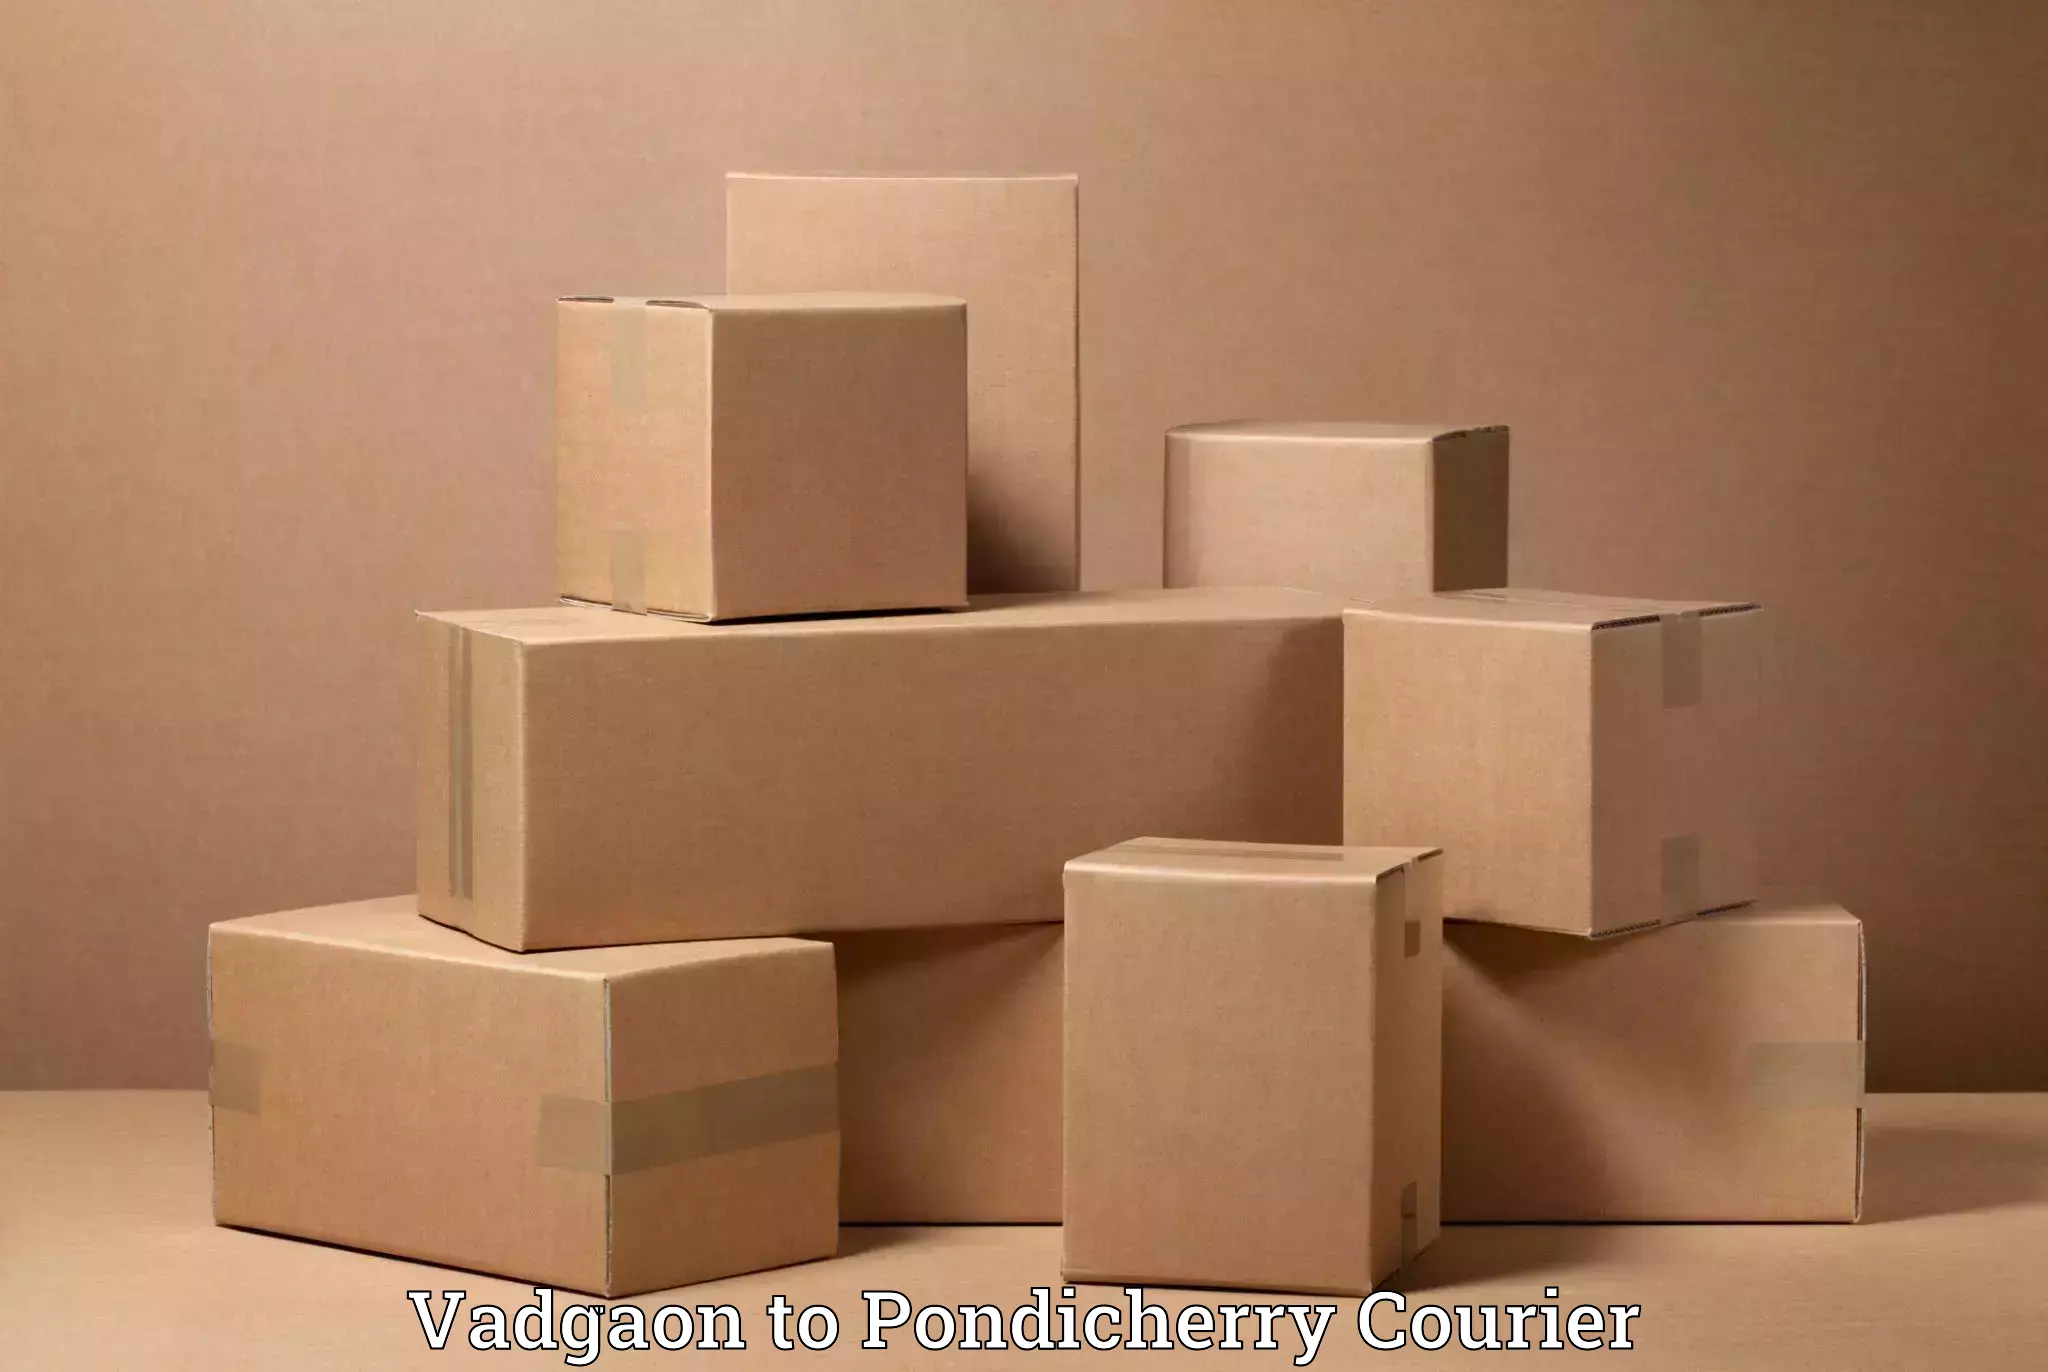 Home shifting experts Vadgaon to Pondicherry